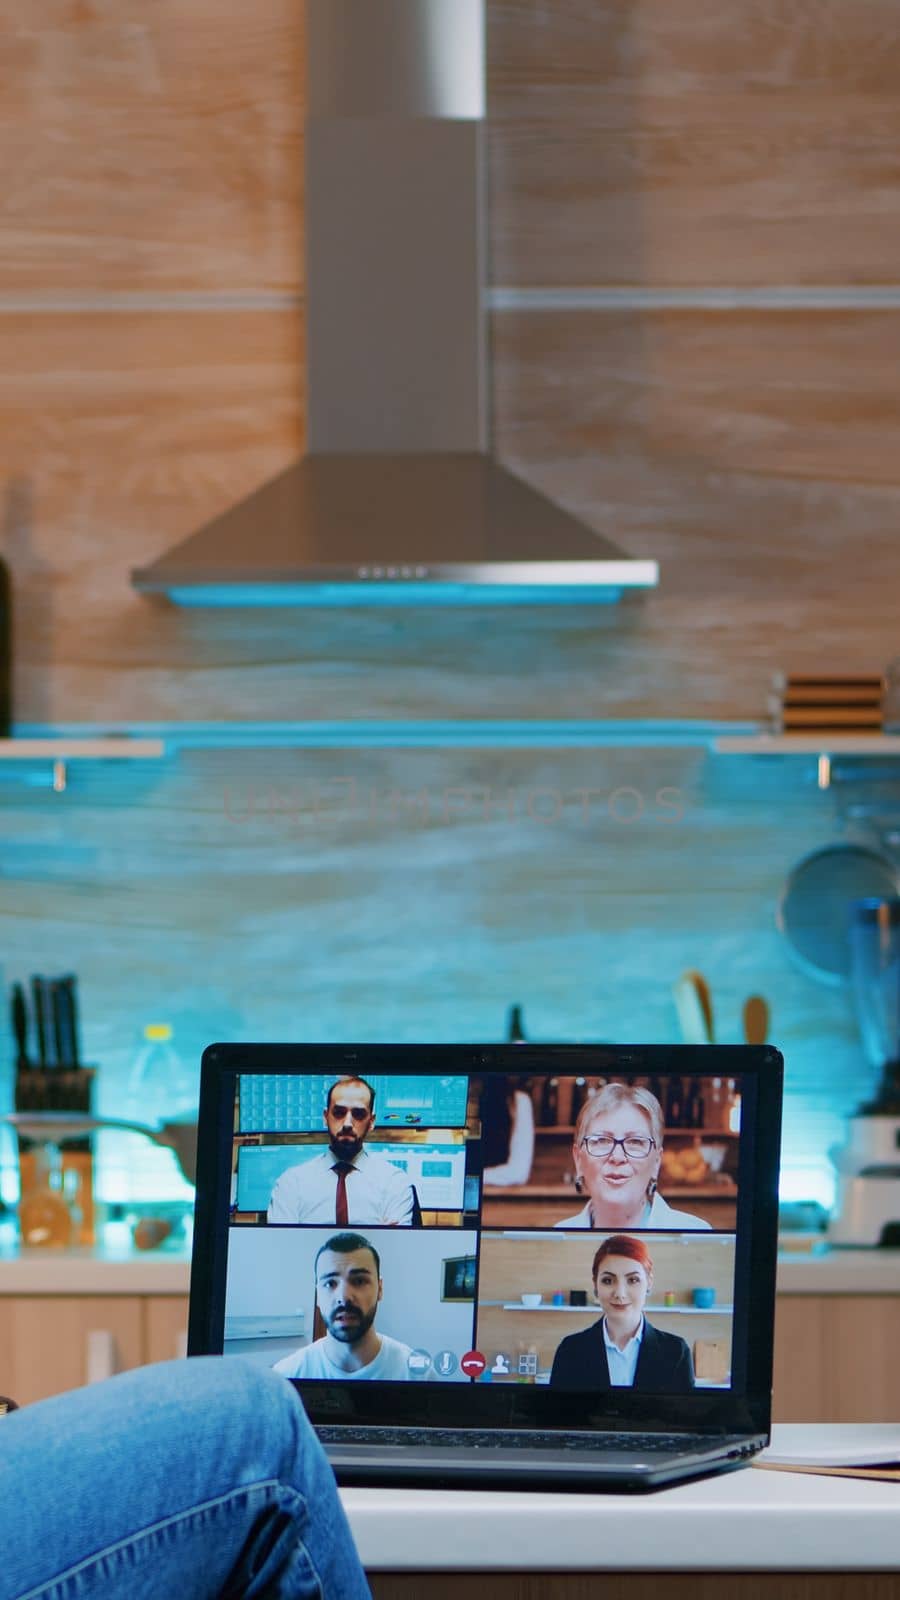 Businesswoman on video conference working remotely from home sitting in the kitchen late at night. Lady using modern technology network wireless talking on virtual meeting at midnight doing overtime